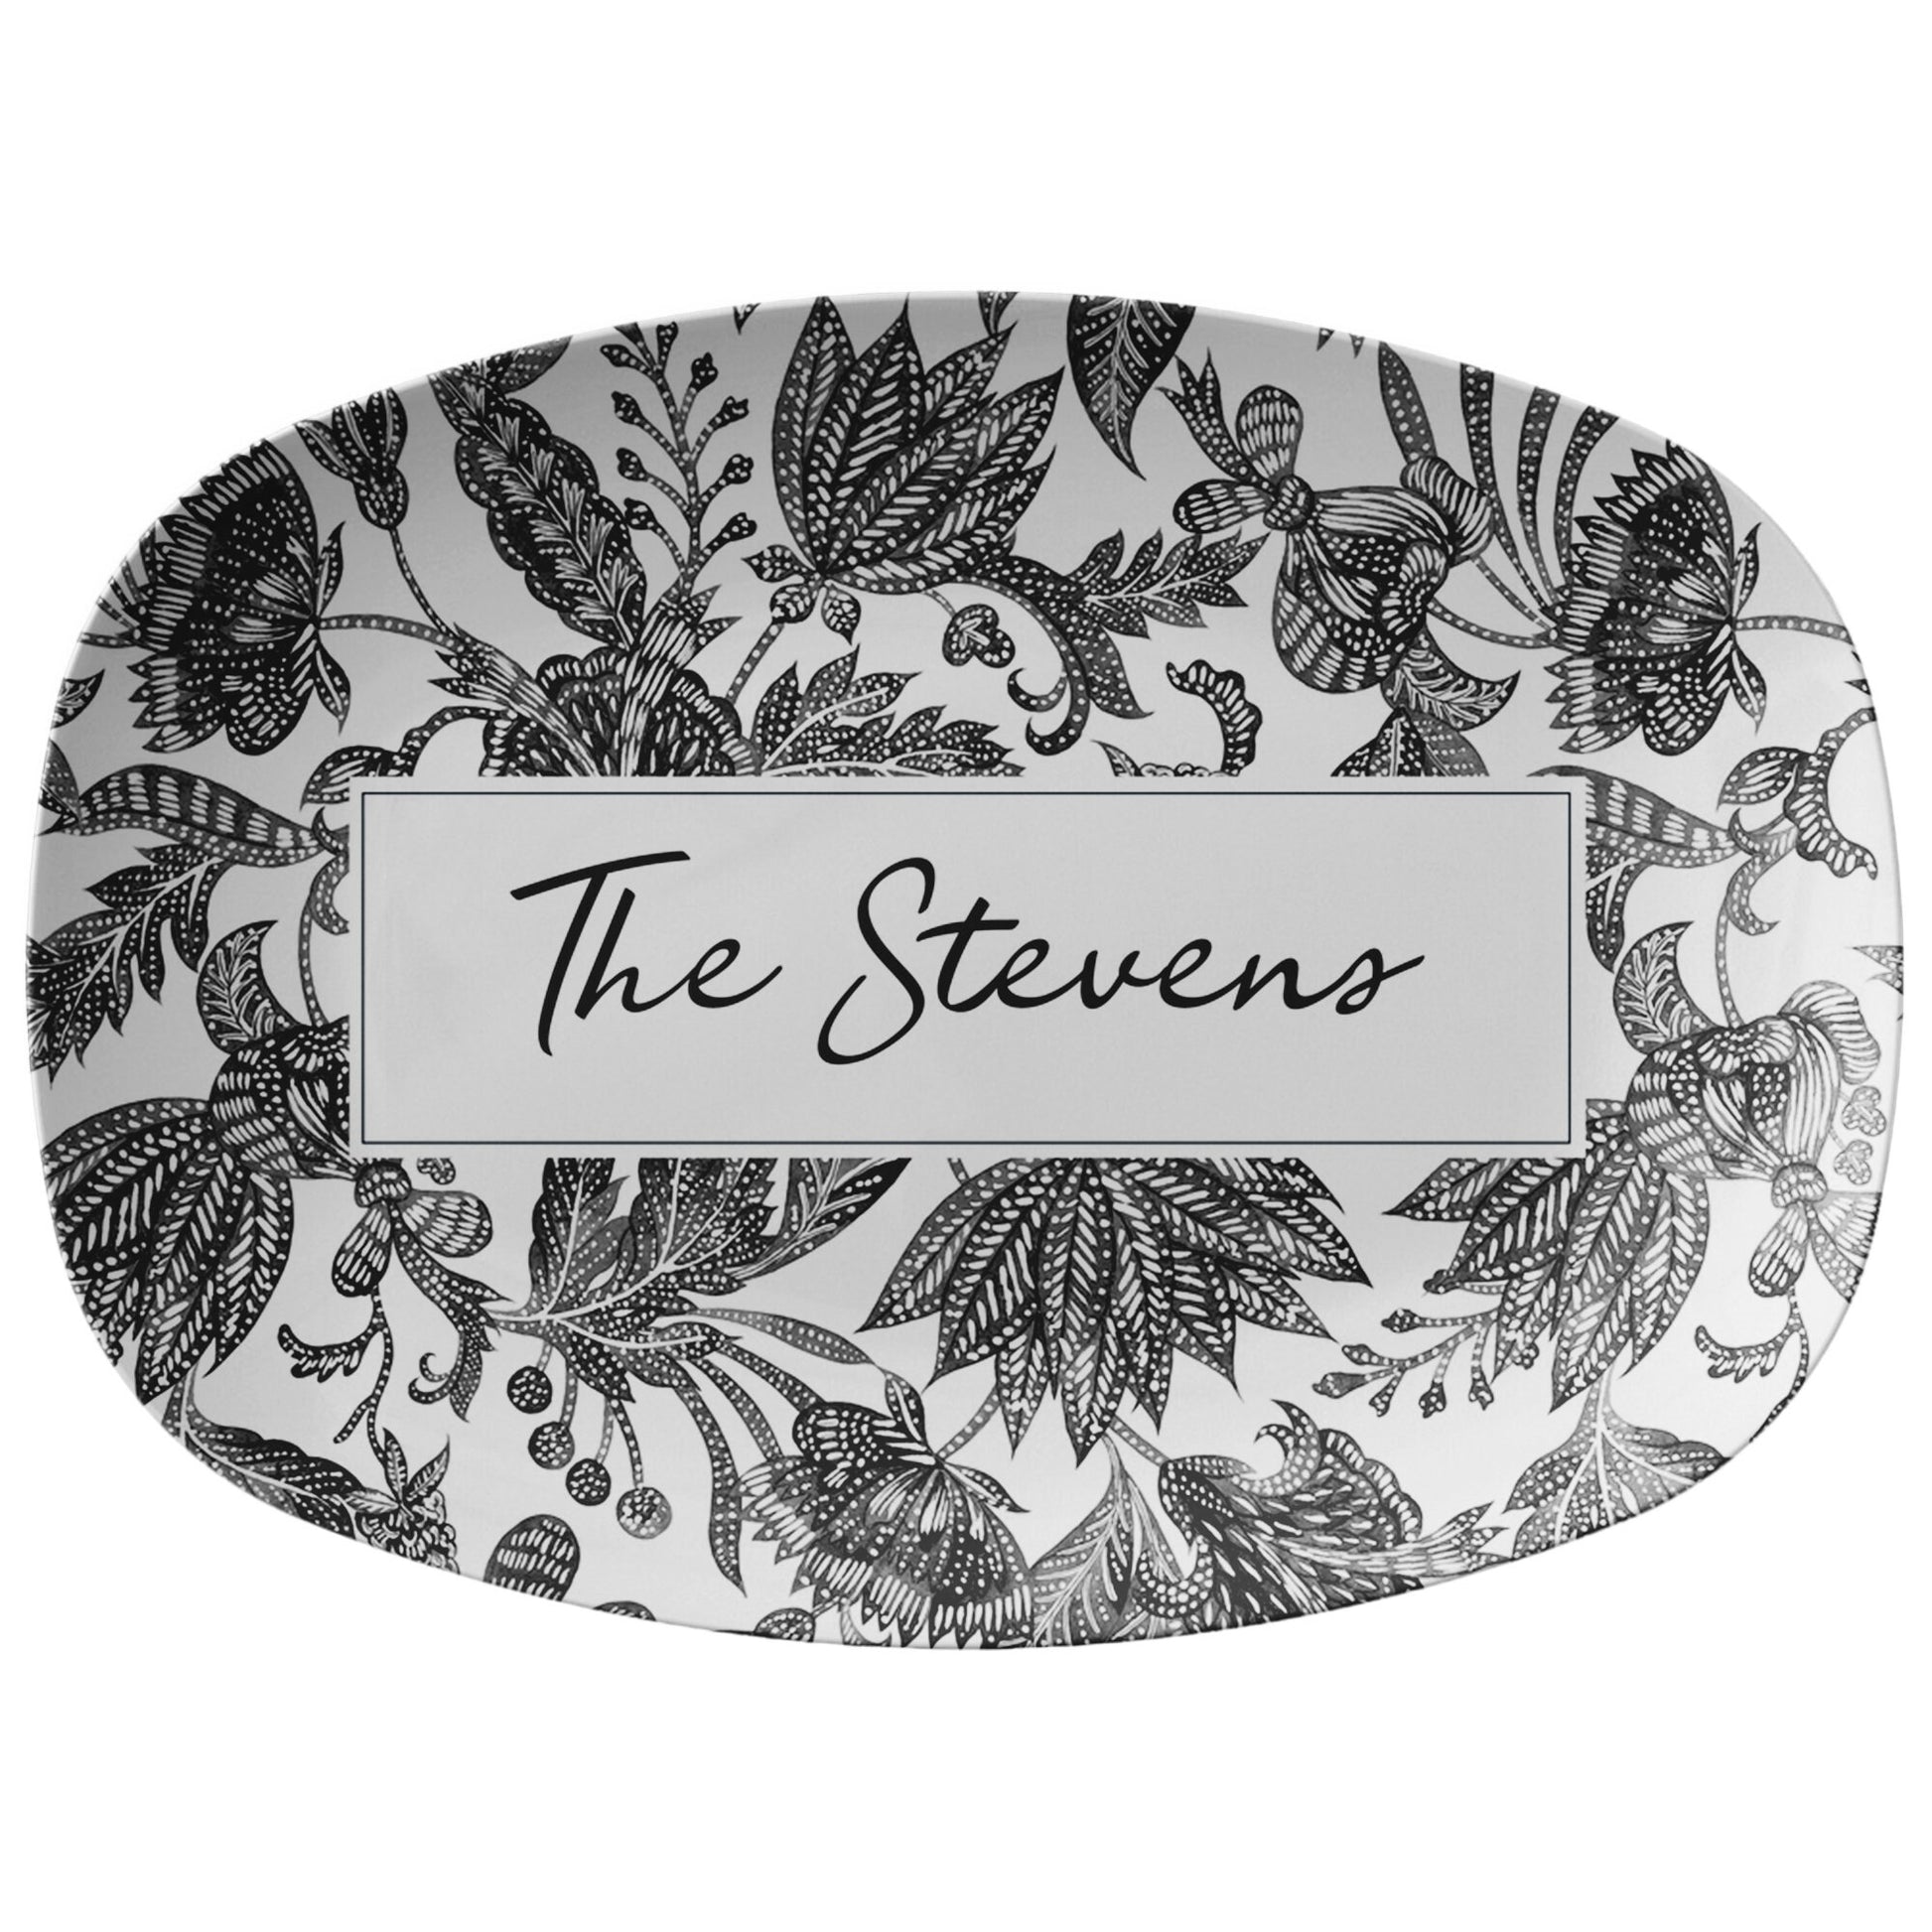 Black, grey and white floral batik pattern printed on luxury plastic platter. Personalize with any name, word or initials. Beautiful and unique gift for the home.